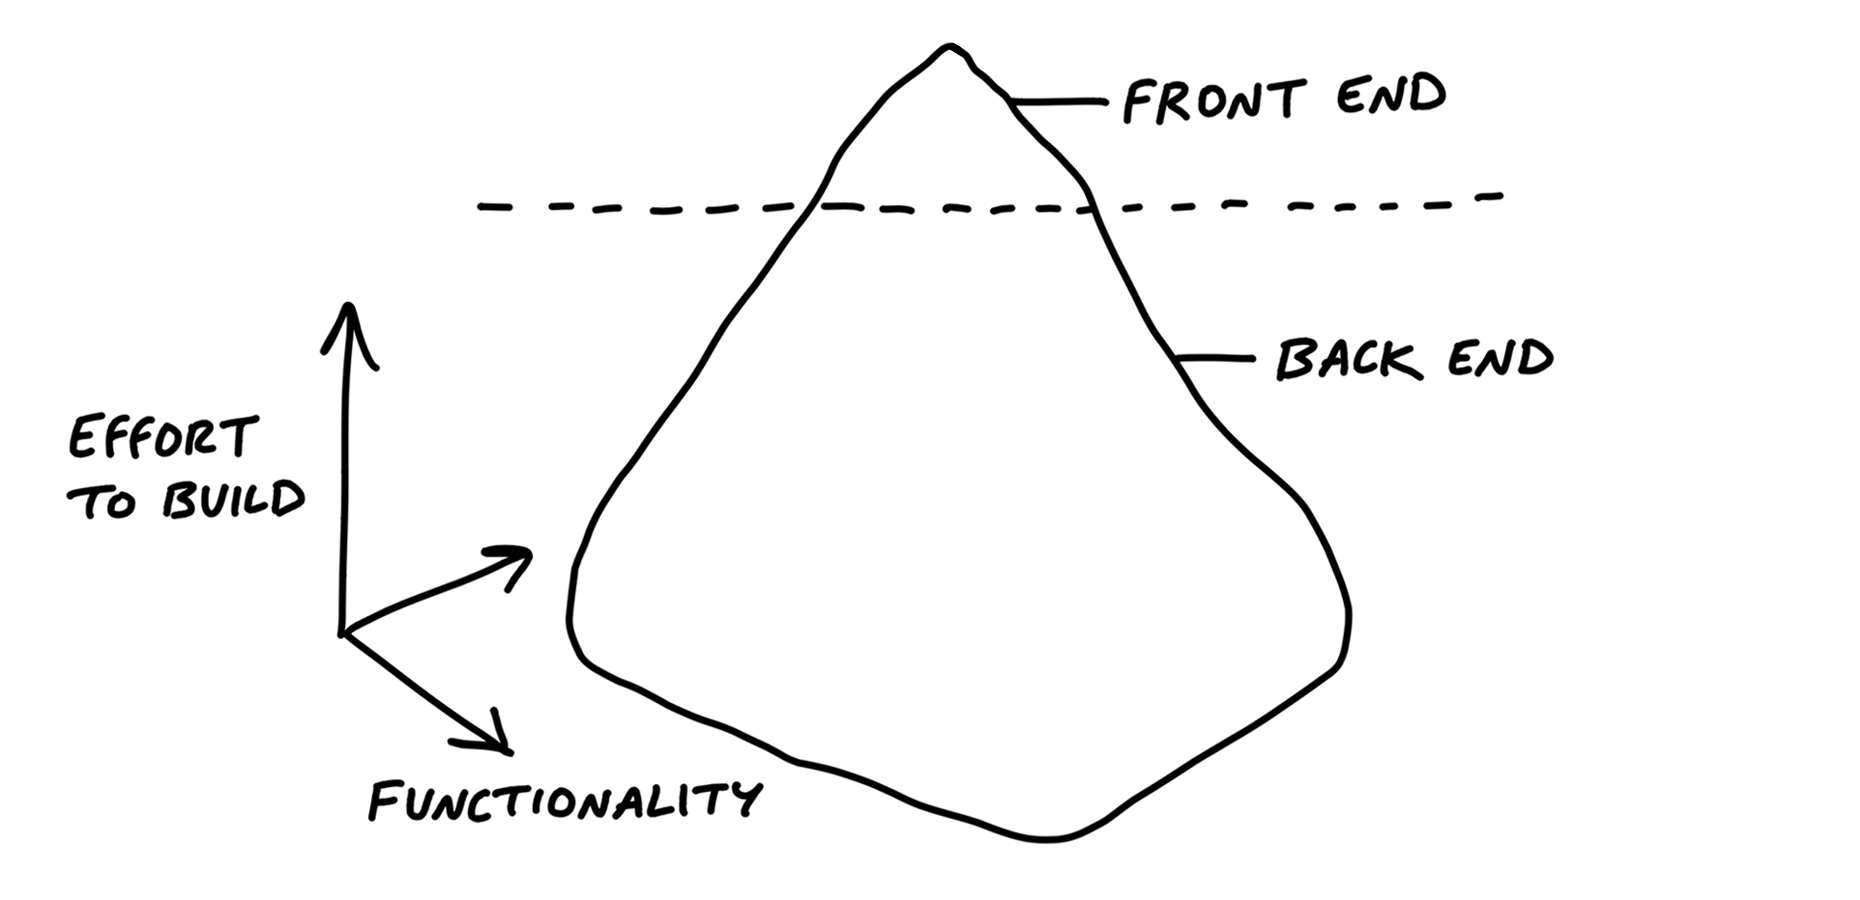 An iceberg is drawn with the same three dimensional axis: height represents effort to build and width and depth represent funtionality. A dotted line marks the water line. The small area above the water line is marked Front End and the rest below the line is marked Back End.